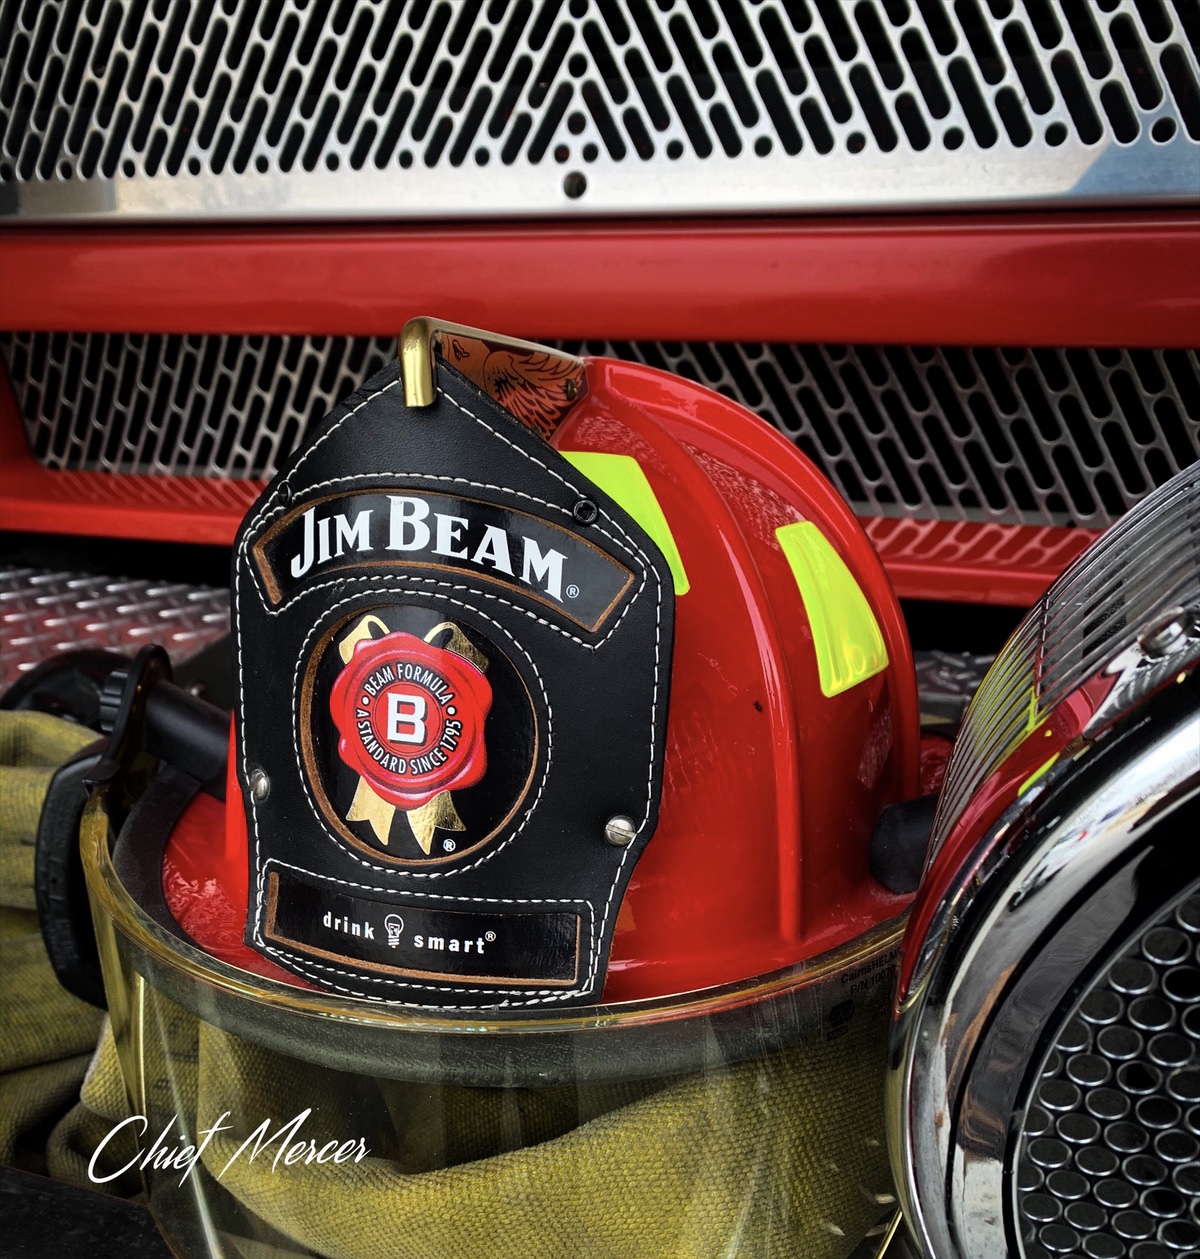 70: Knob Creek with Fire Chief Mercer